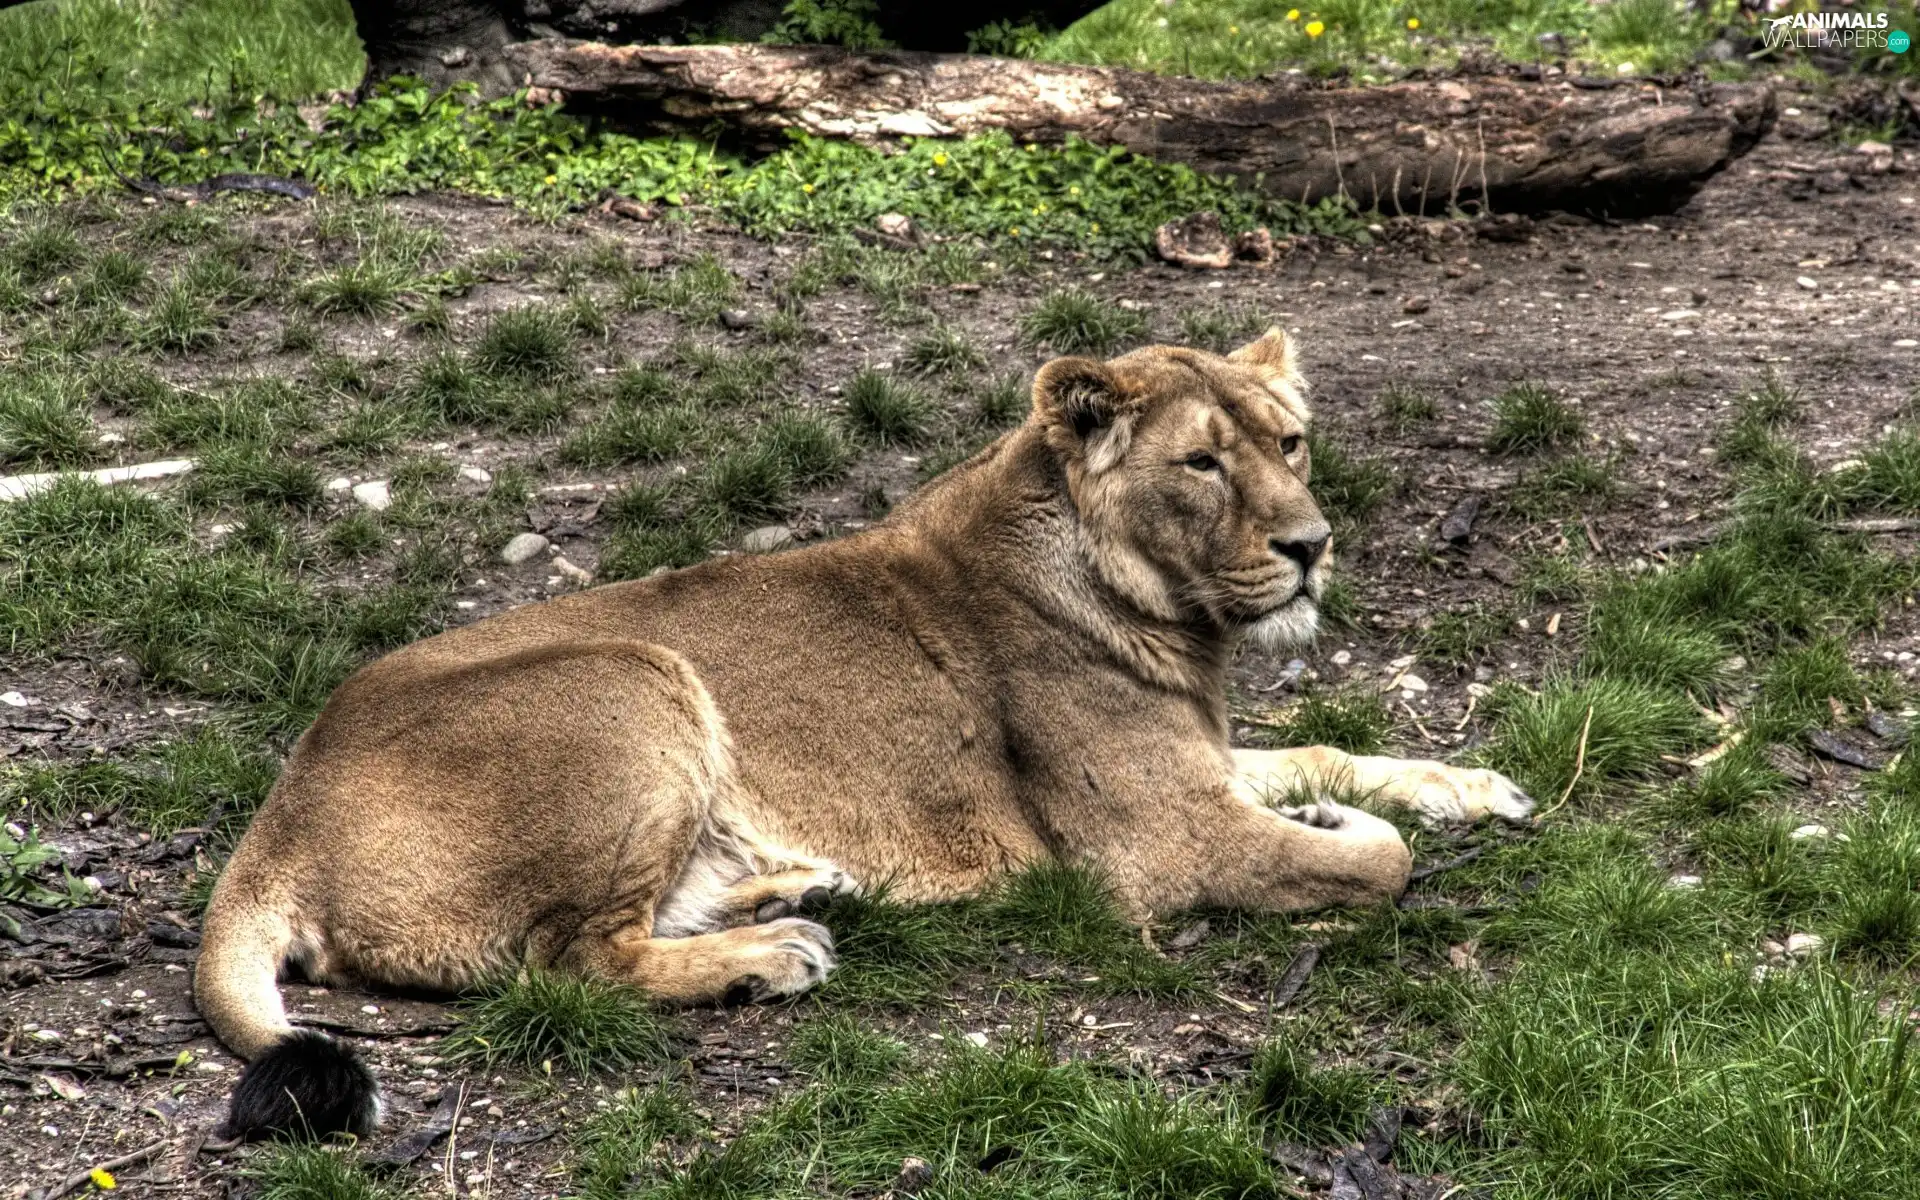 grass, Lod on the beach, Lioness, Clumps, laying